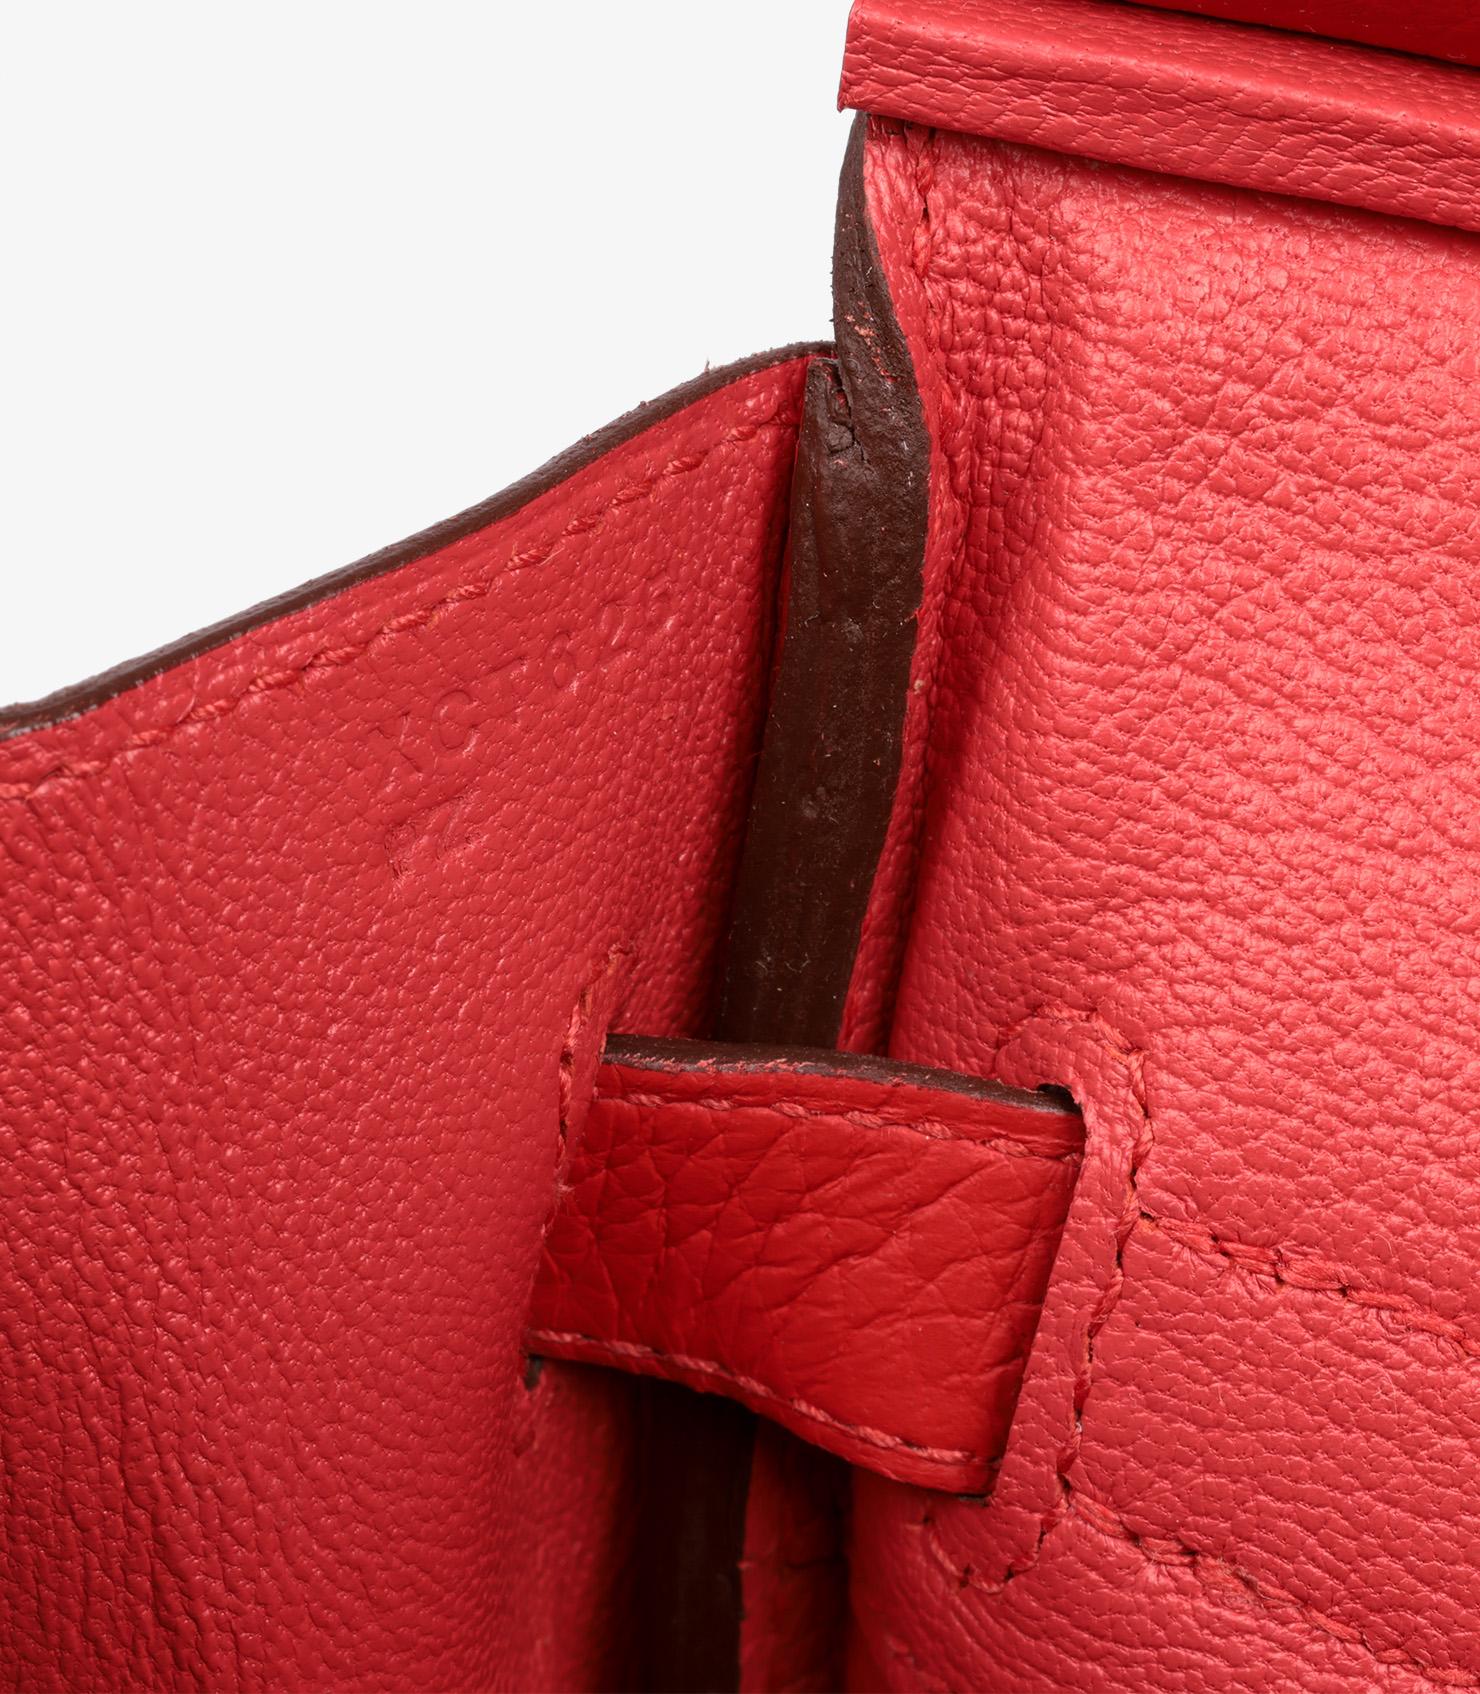 Hermès Rouge Tomate Clemence Leather Birkin 30cm For Sale 5